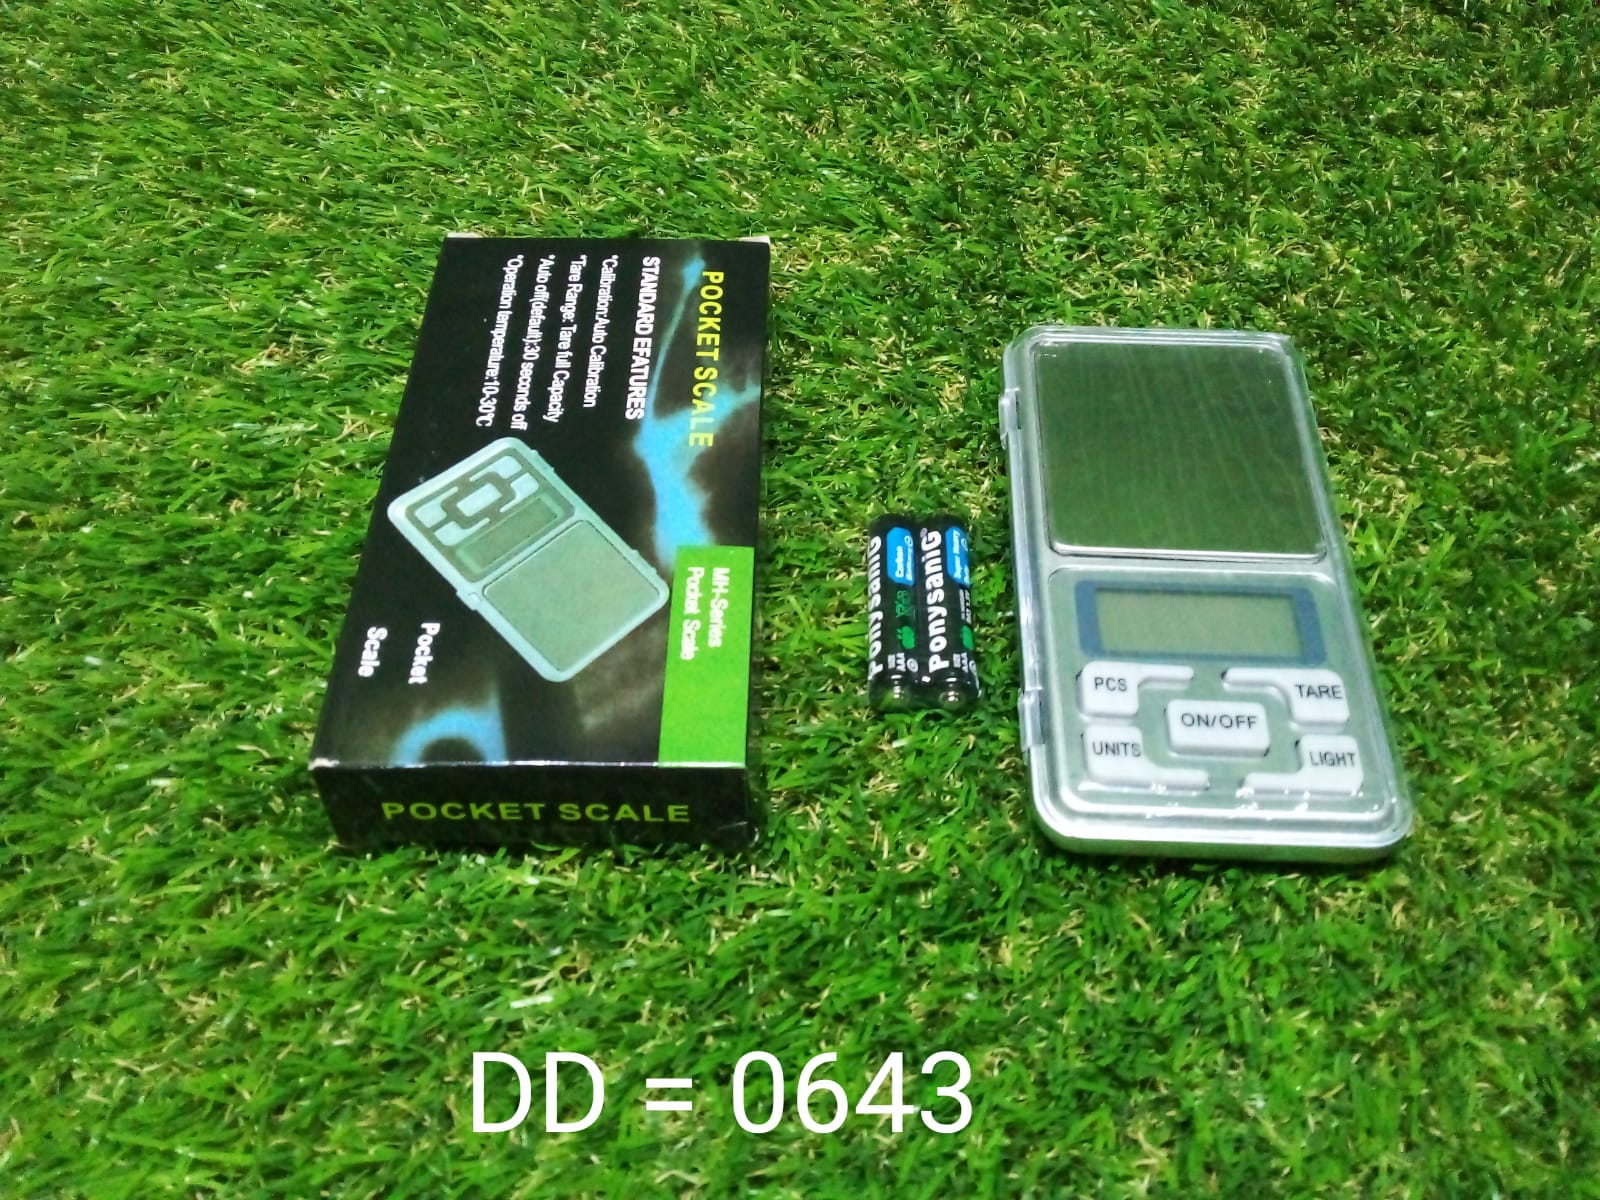 643 Multipurpose (MH-200) LCD Screen Digital Electronic Portable Mini Pocket Scale(Weighing Scale), 200g DeoDap